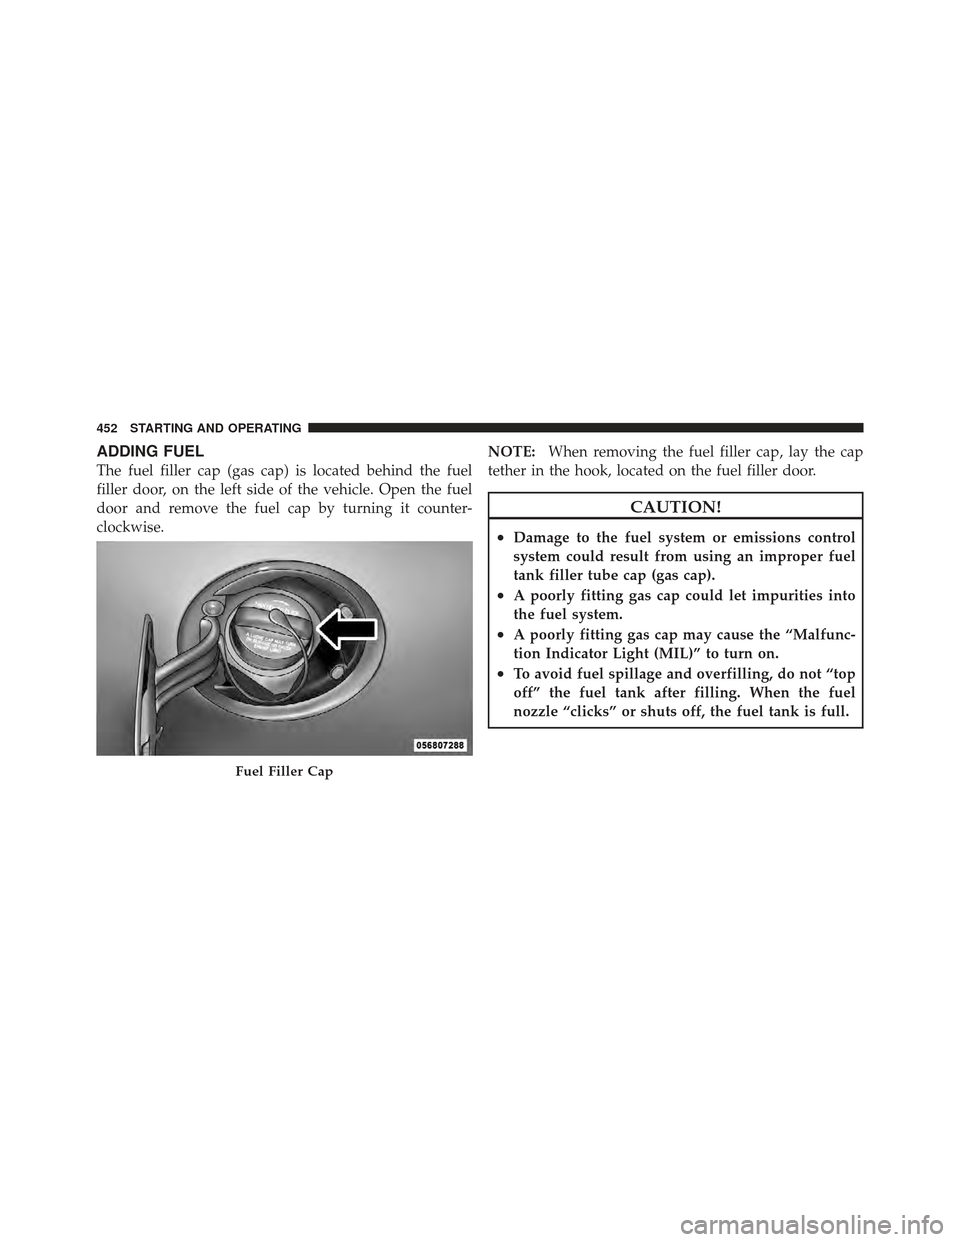 Ram 1500 2011  Owners Manual ADDING FUEL
The fuel filler cap (gas cap) is located behind the fuel
filler door, on the left side of the vehicle. Open the fuel
door and remove the fuel cap by turning it counter-
clockwise.NOTE:
Whe